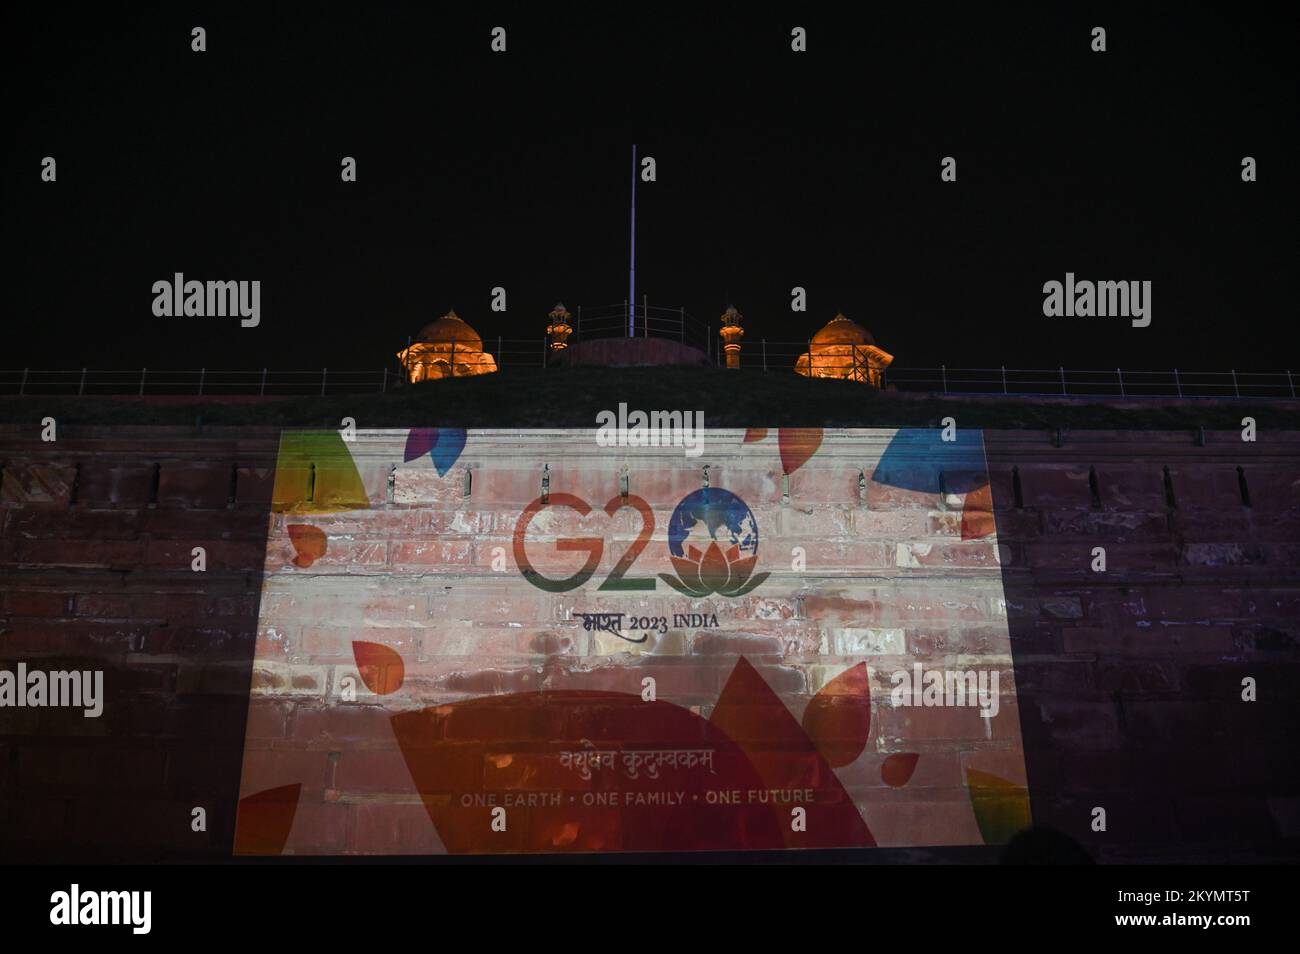 December 1, 2022, New Delhi, Delhi, India: A projection of the G20 or Group of Twenty logo can be seen on the Red Fort monument in New Delhi. India officially assumed the G20 Presidency on December 01, 2022 for a year. (Credit Image: © Kabir Jhangiani/ZUMA Press Wire) Stock Photo